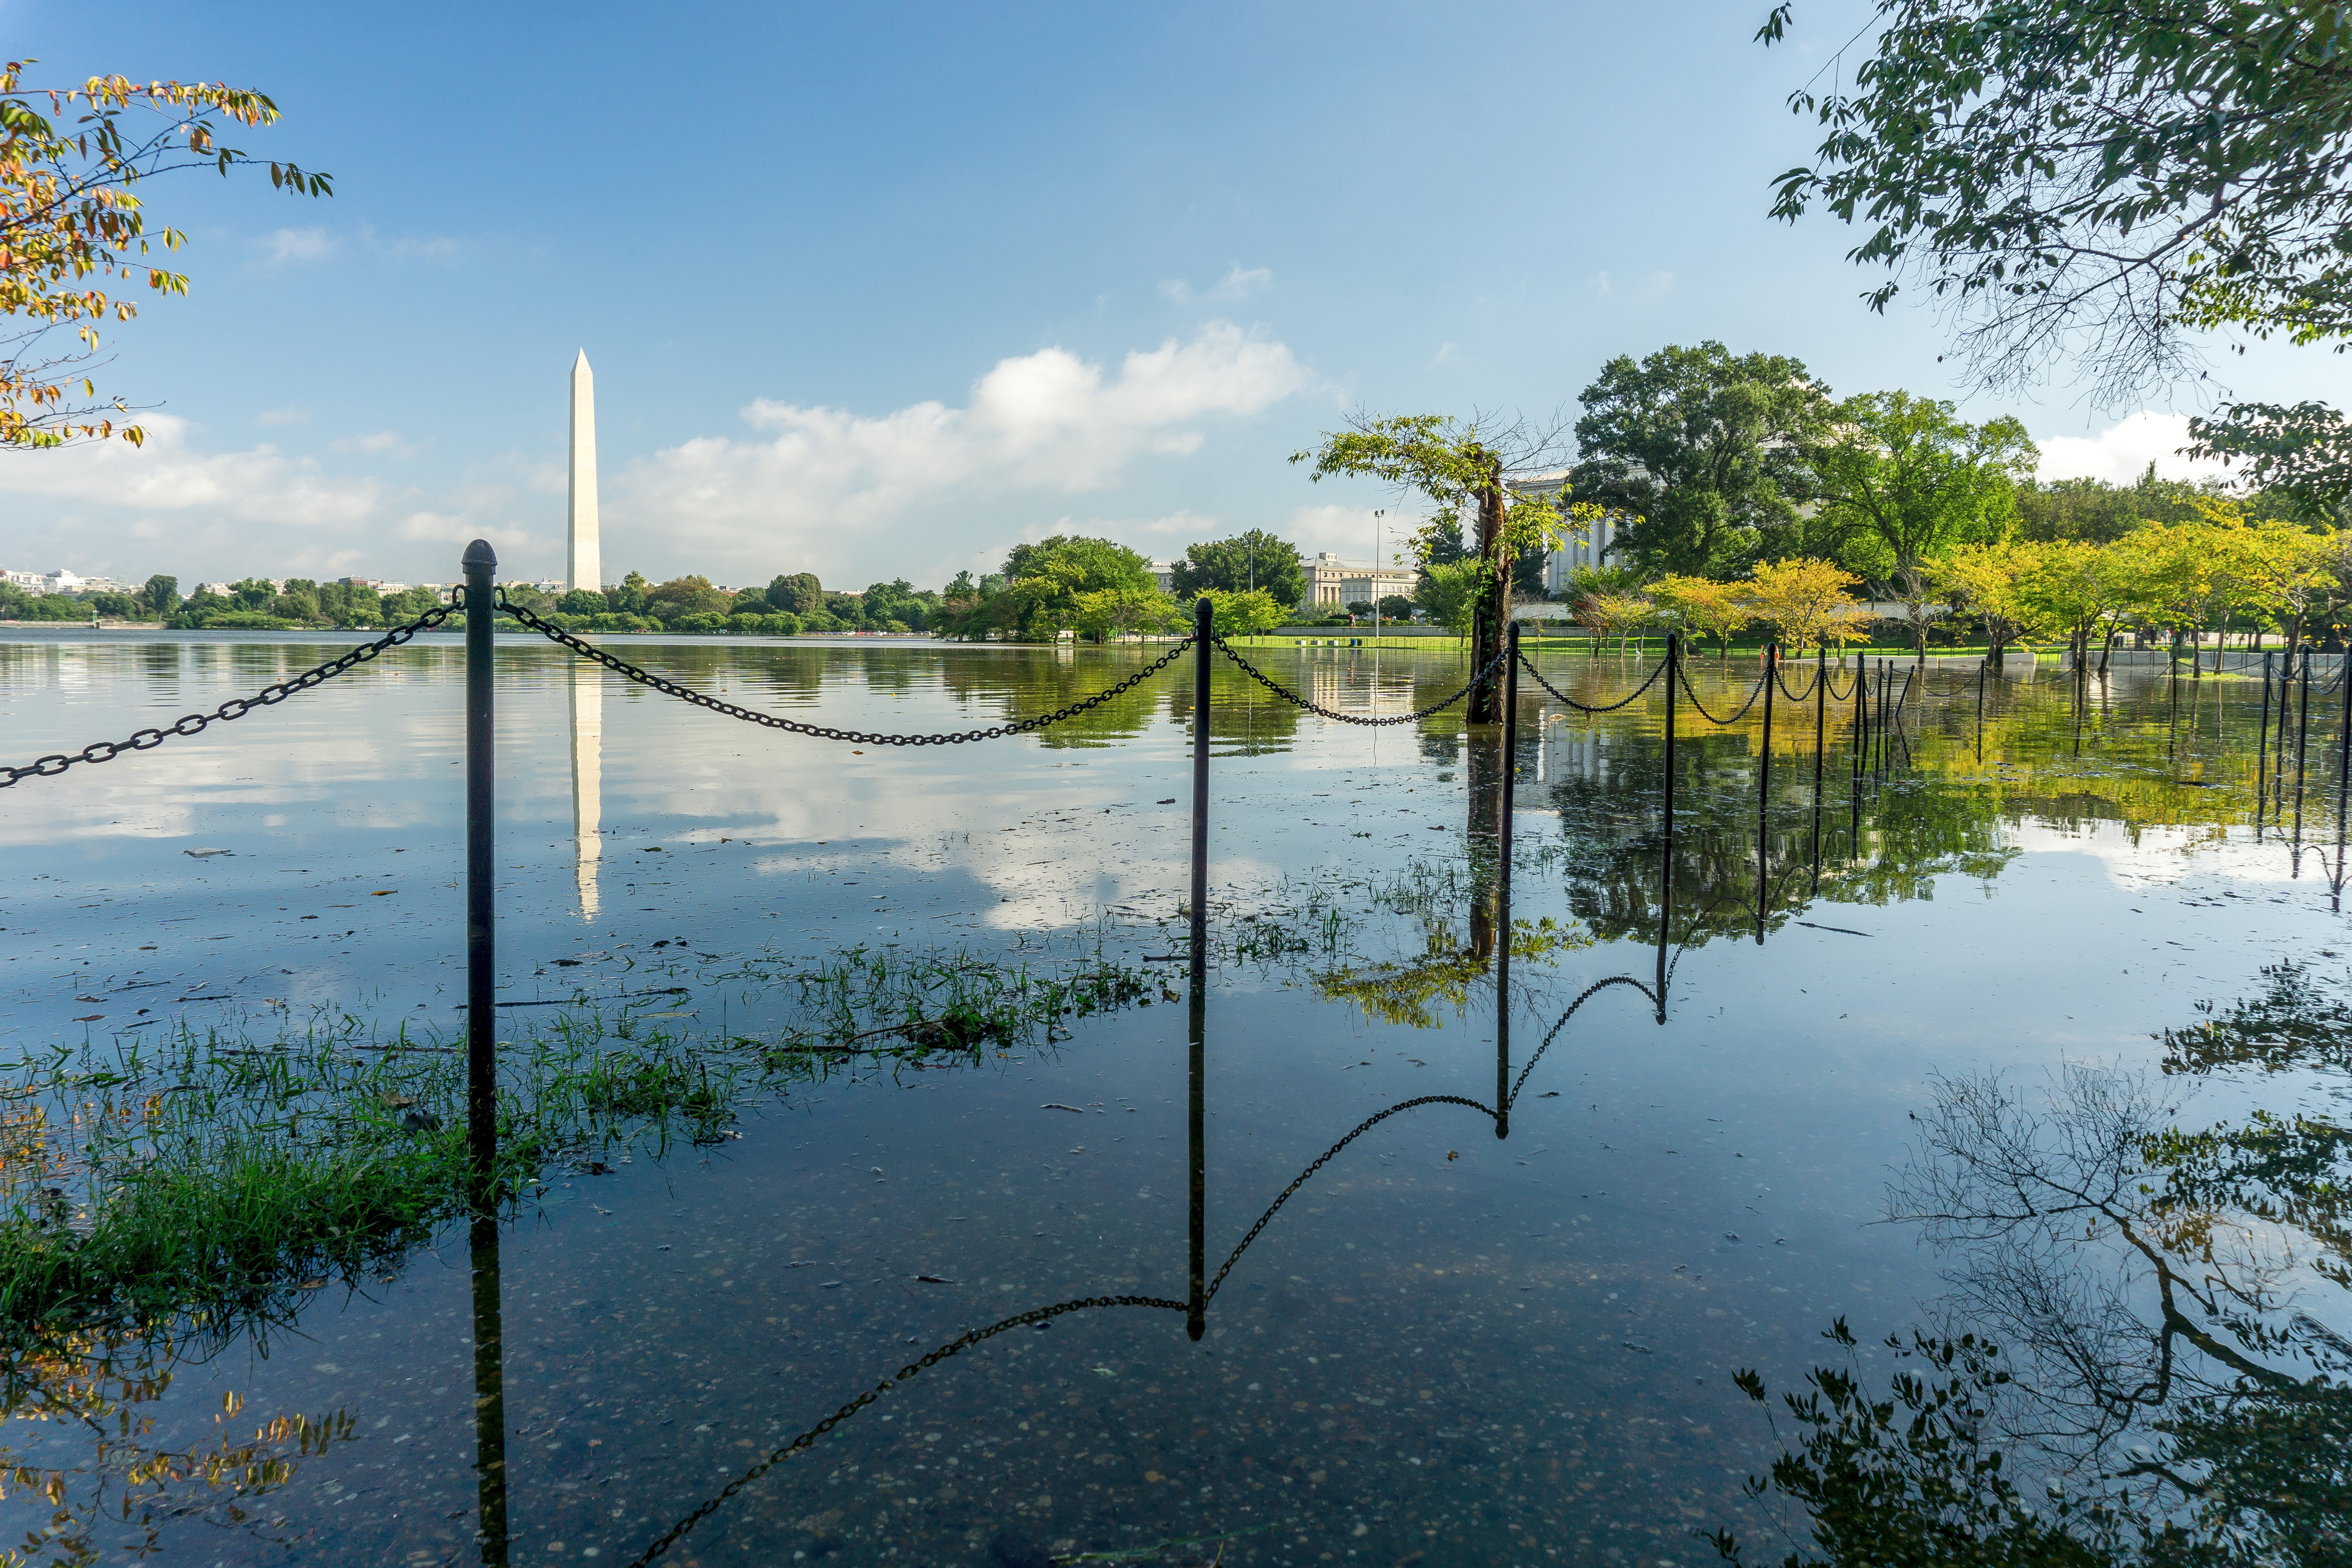 A walkway next to a basin is flooded with a few inches of water. A tall obelisk stands in the background against bright blue skies.